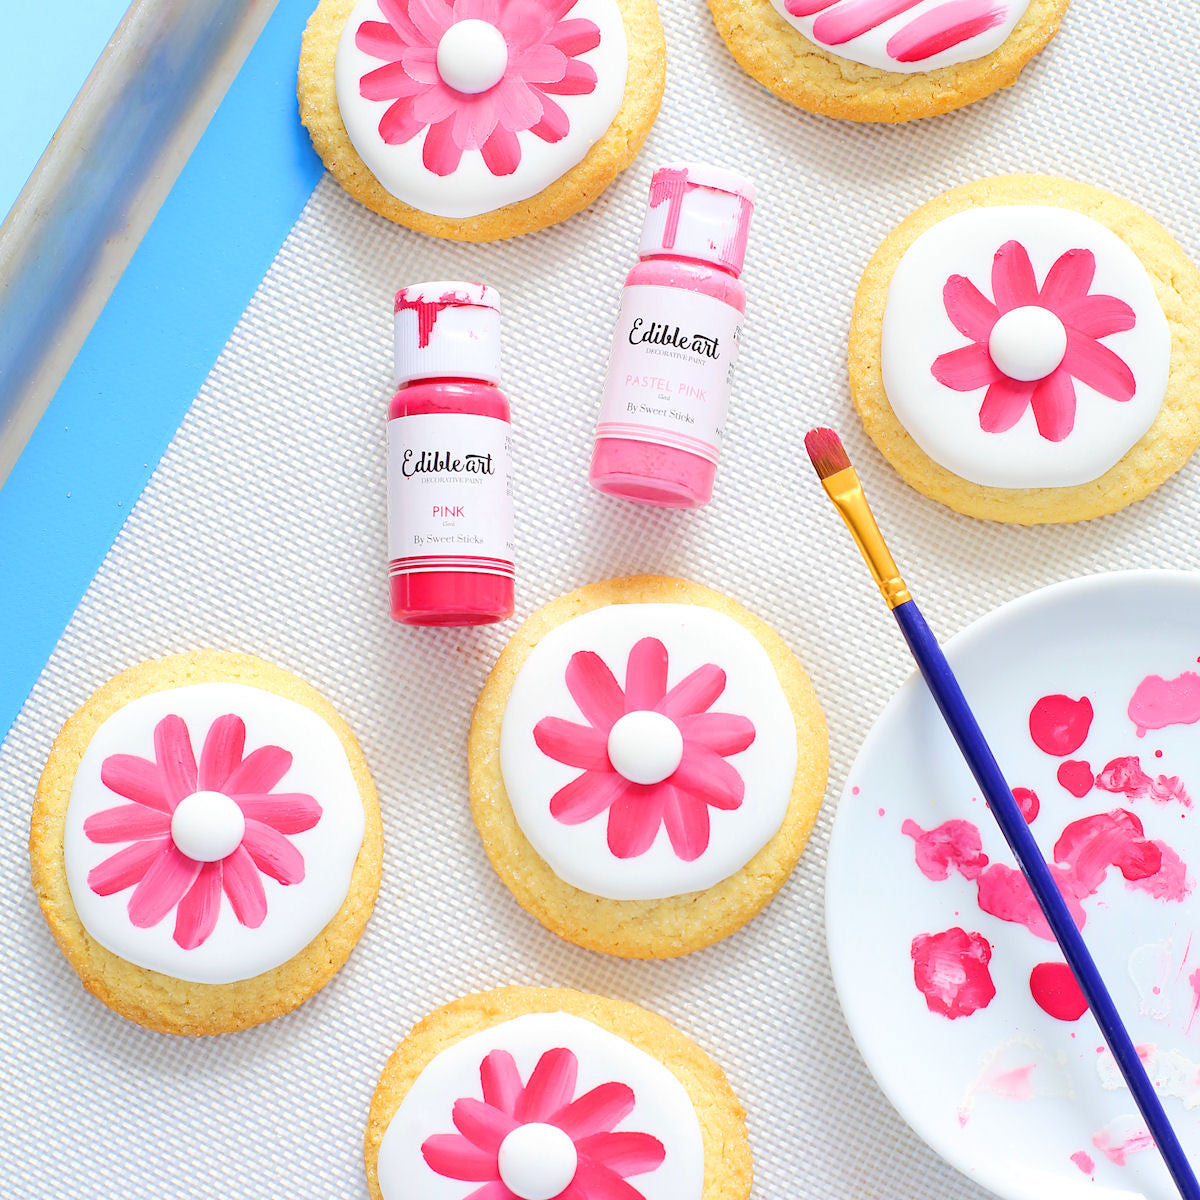 Cookie Decorating with Edible Paint